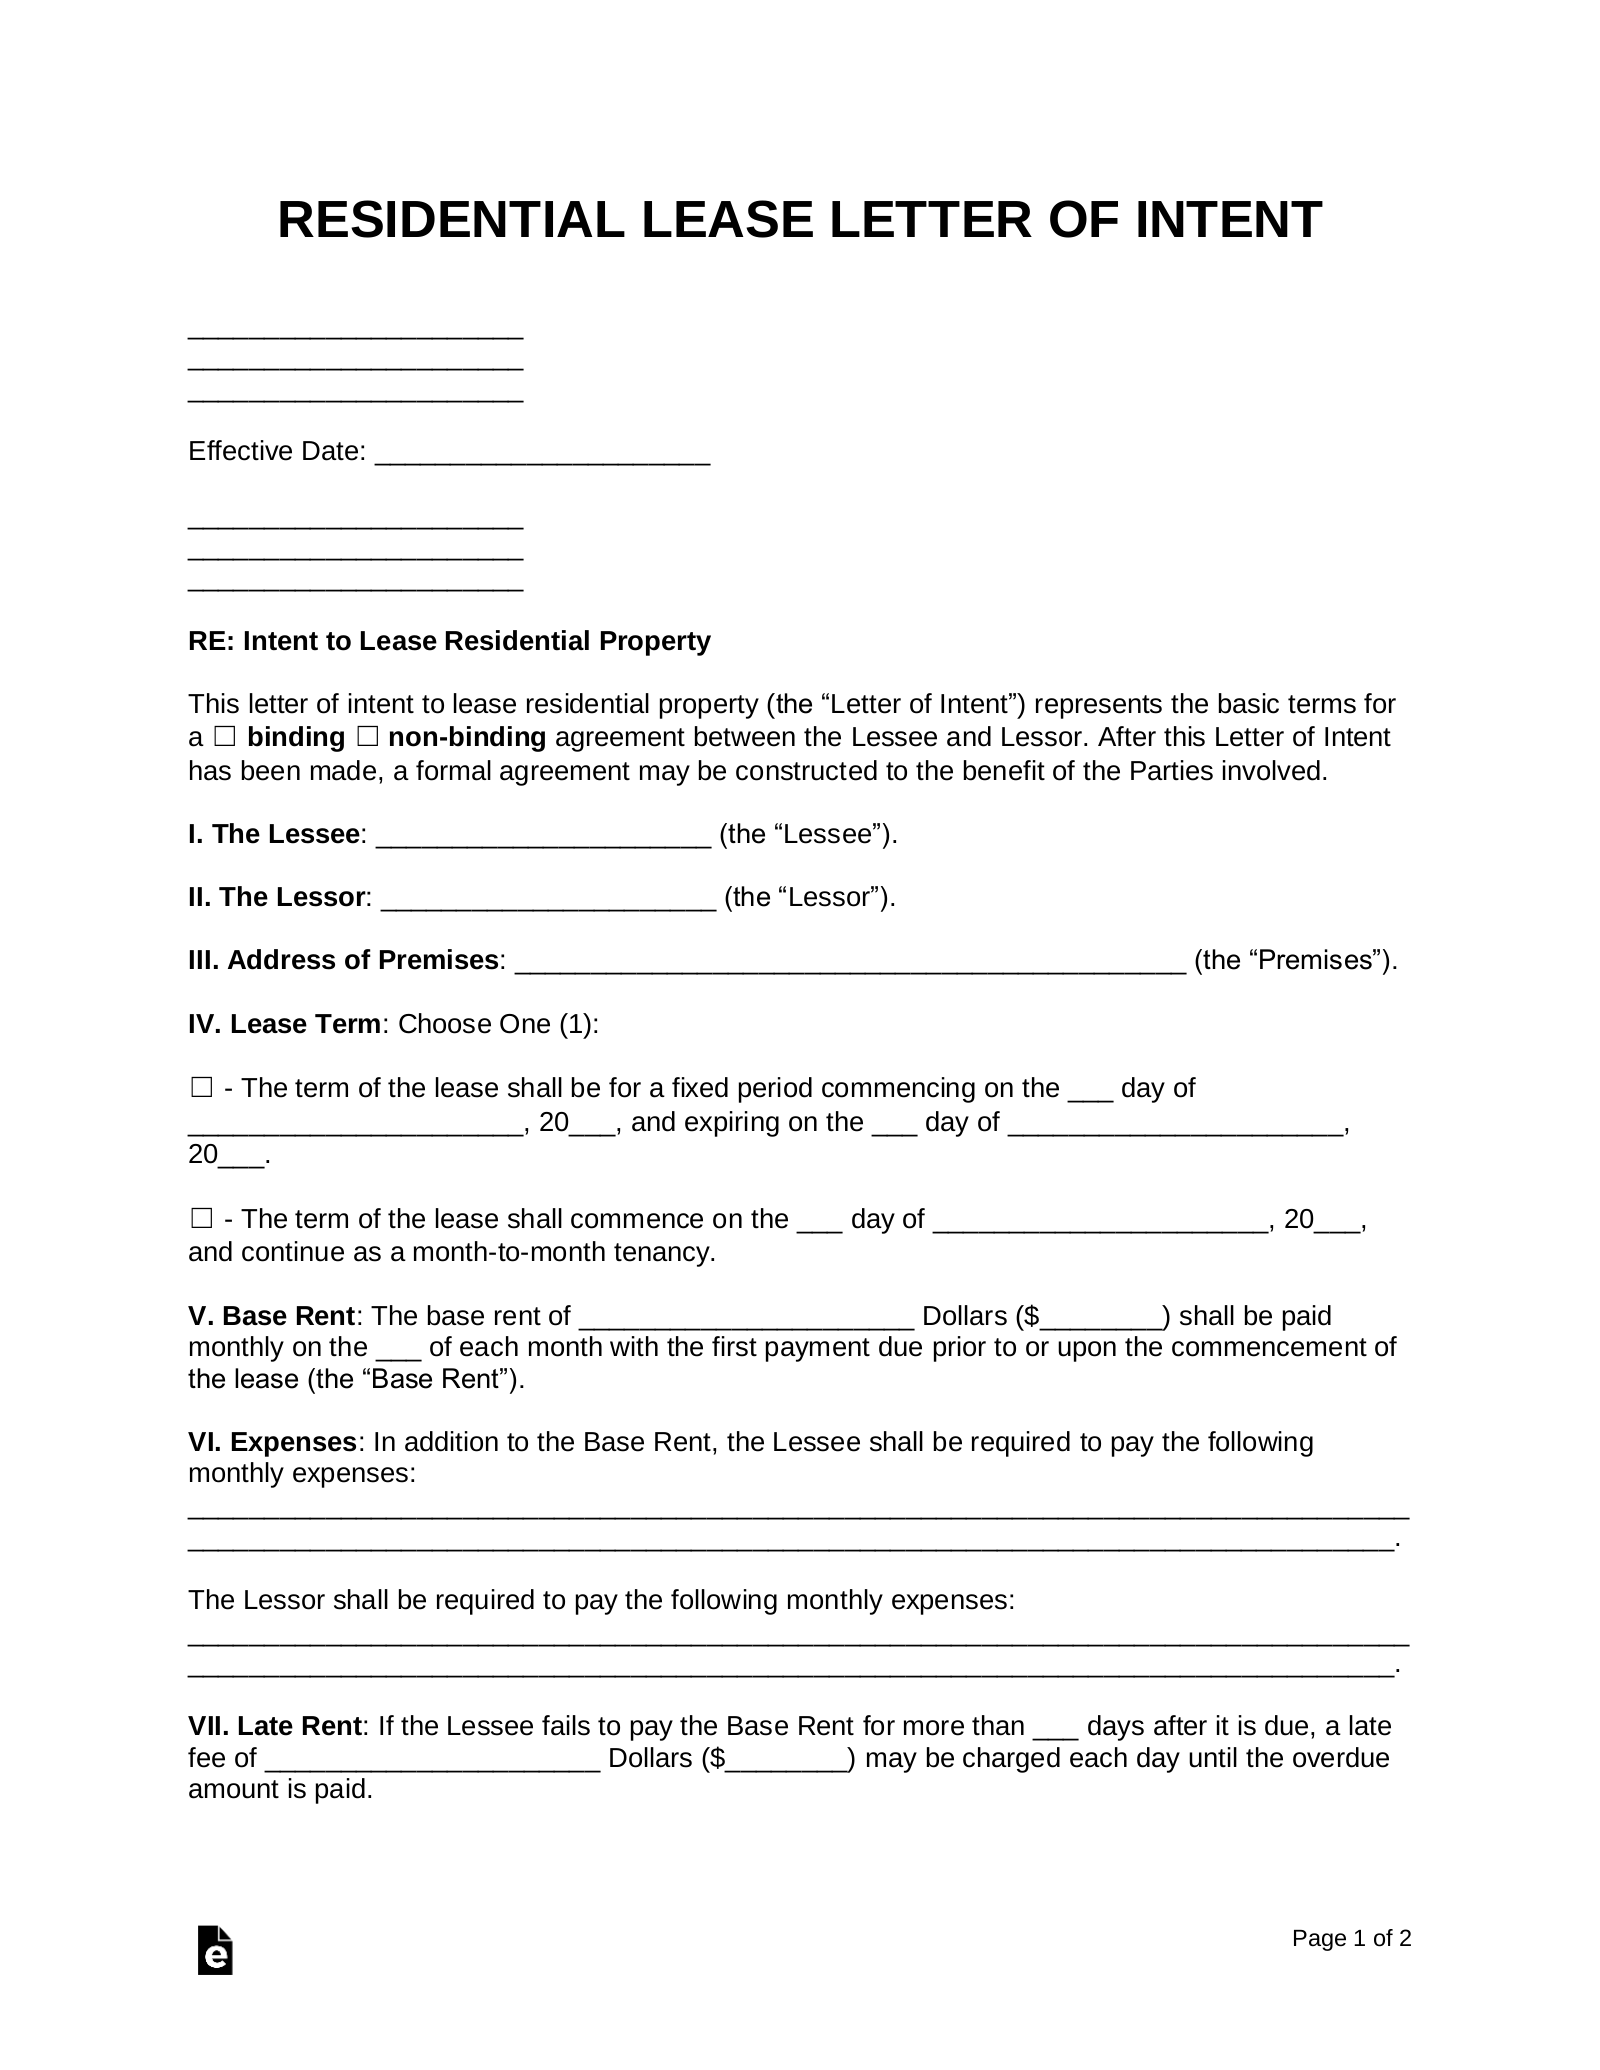 Intent To Lease Letter Template from eforms.com